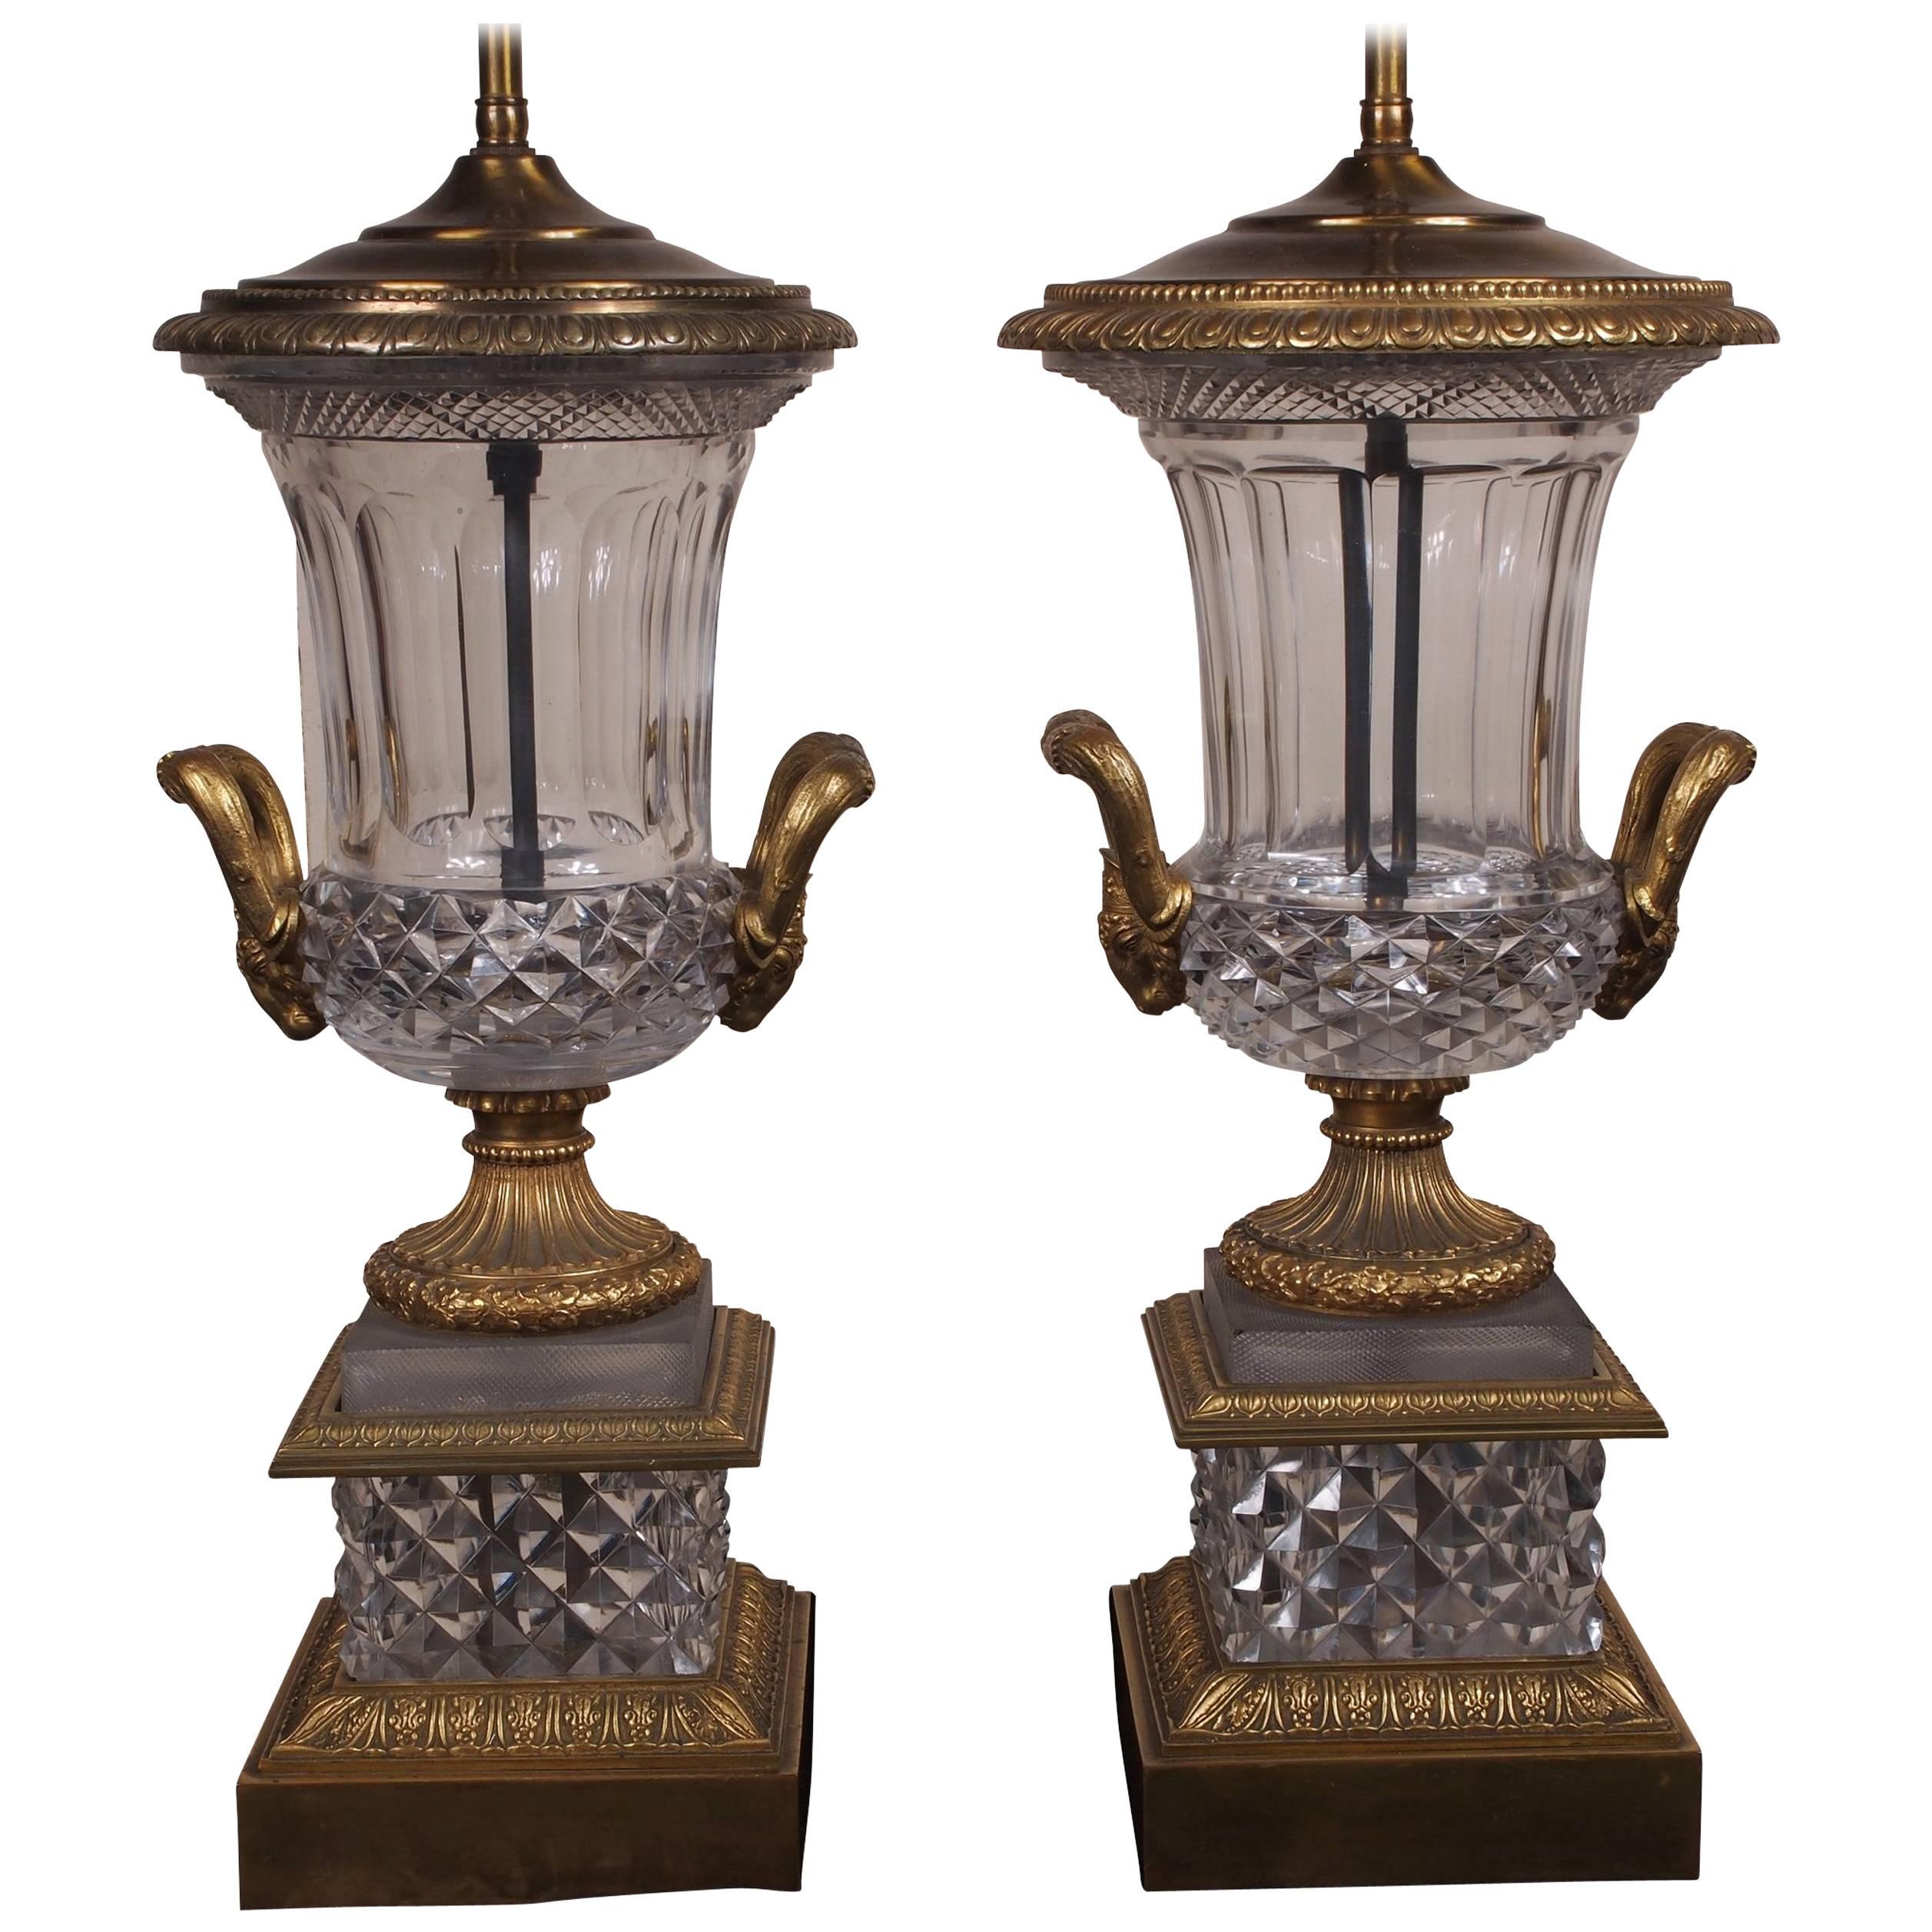  Spectacular Neoclassical Style Pair of Crystal and Bronze Urn Lamps